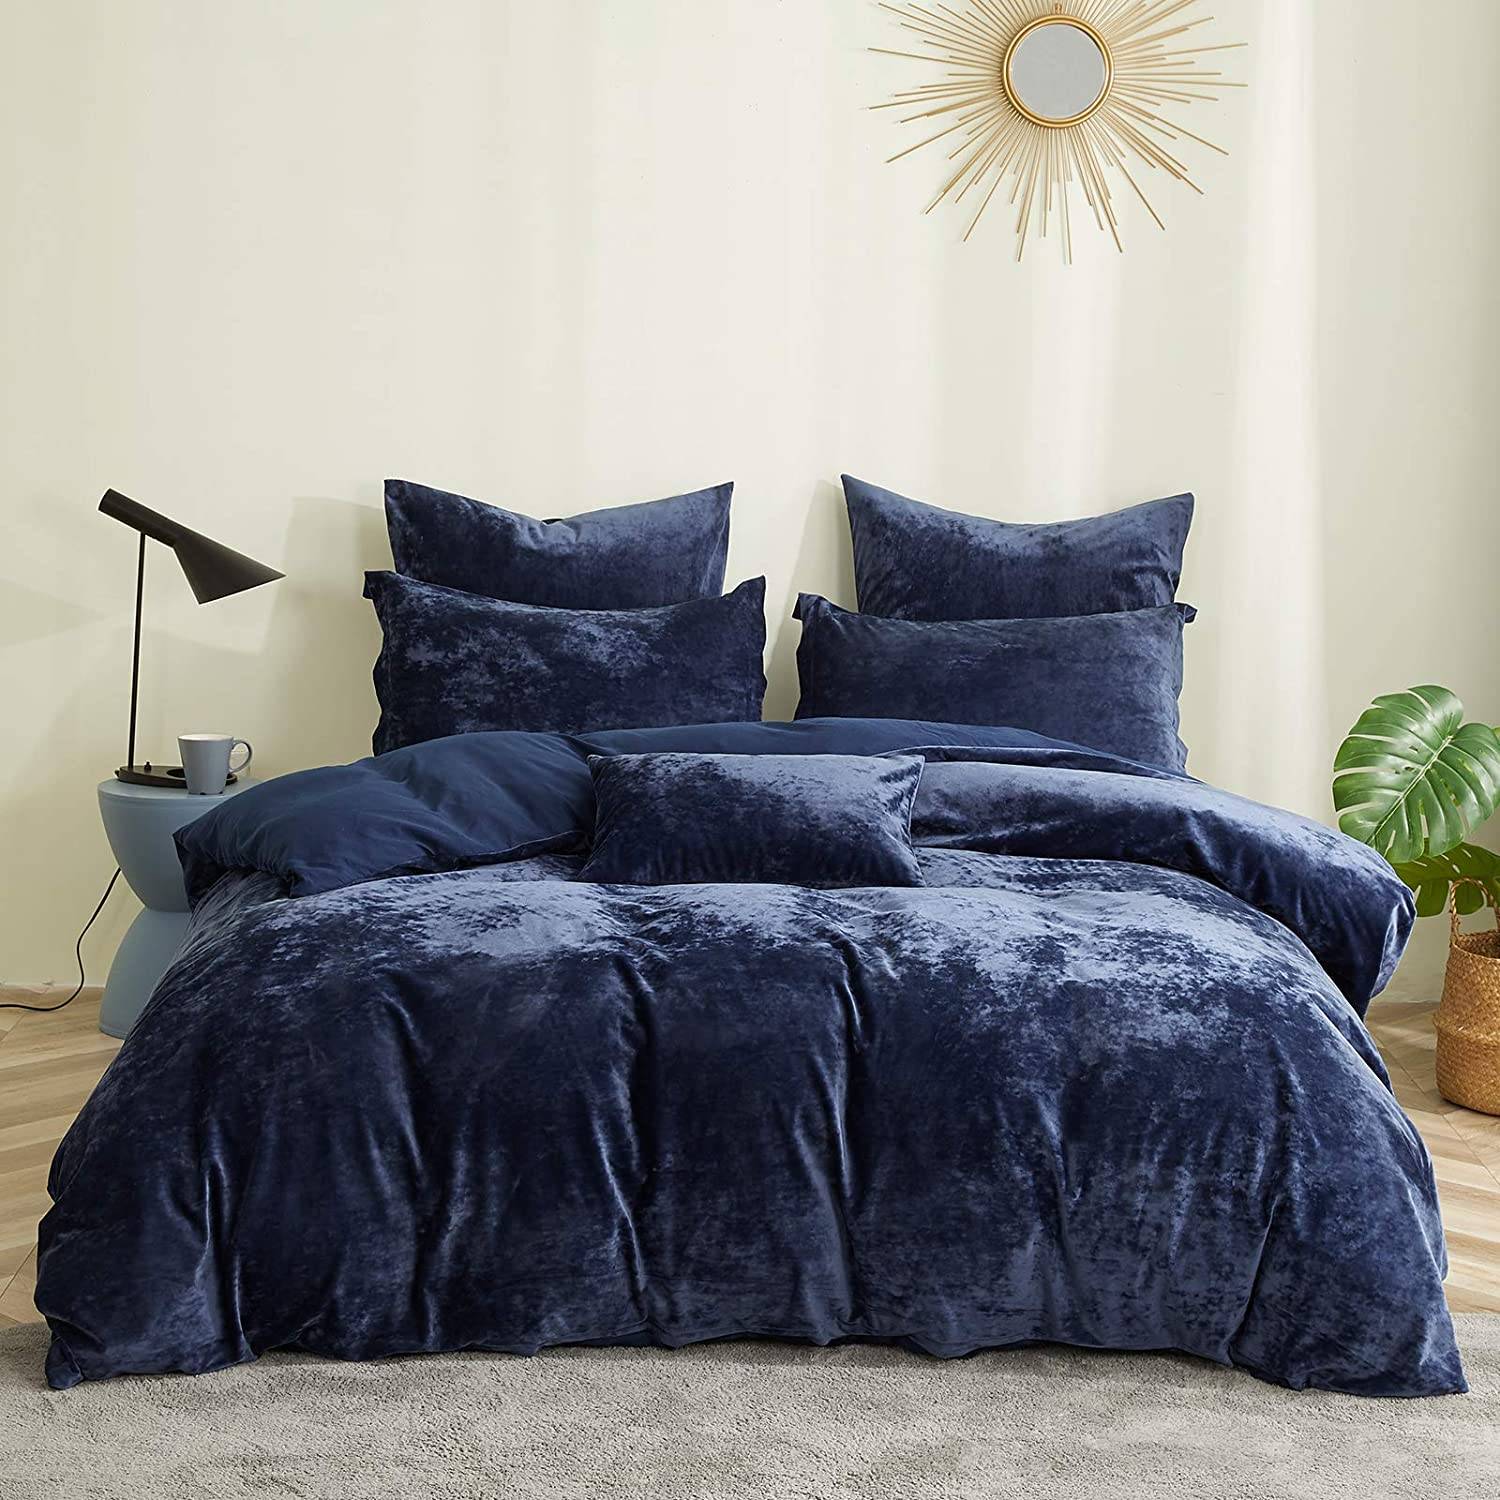 Discount wholesale Silky Pajamas - Heavyweight Velvet Duvet Cover Set give a comfortable feeling in bedding – SUPER